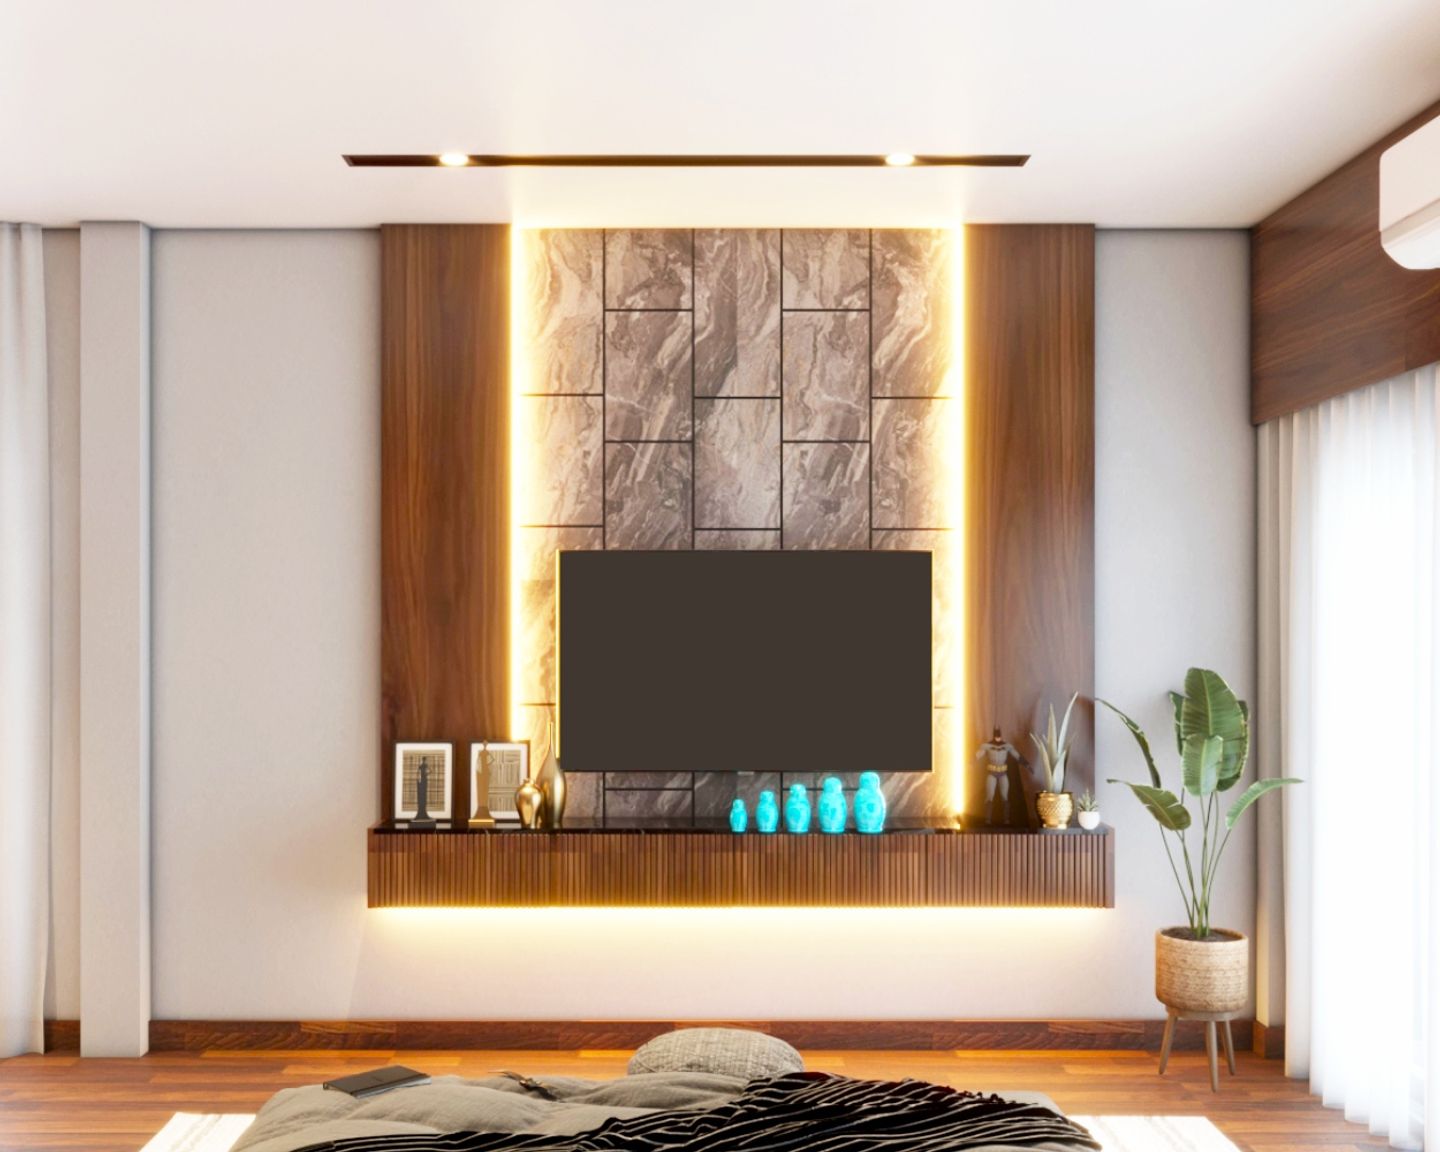 12x11 Ft Contemporary Persian Walnut TV Unit Design with Marble Tile Wall and Drawer Storage - Livspace